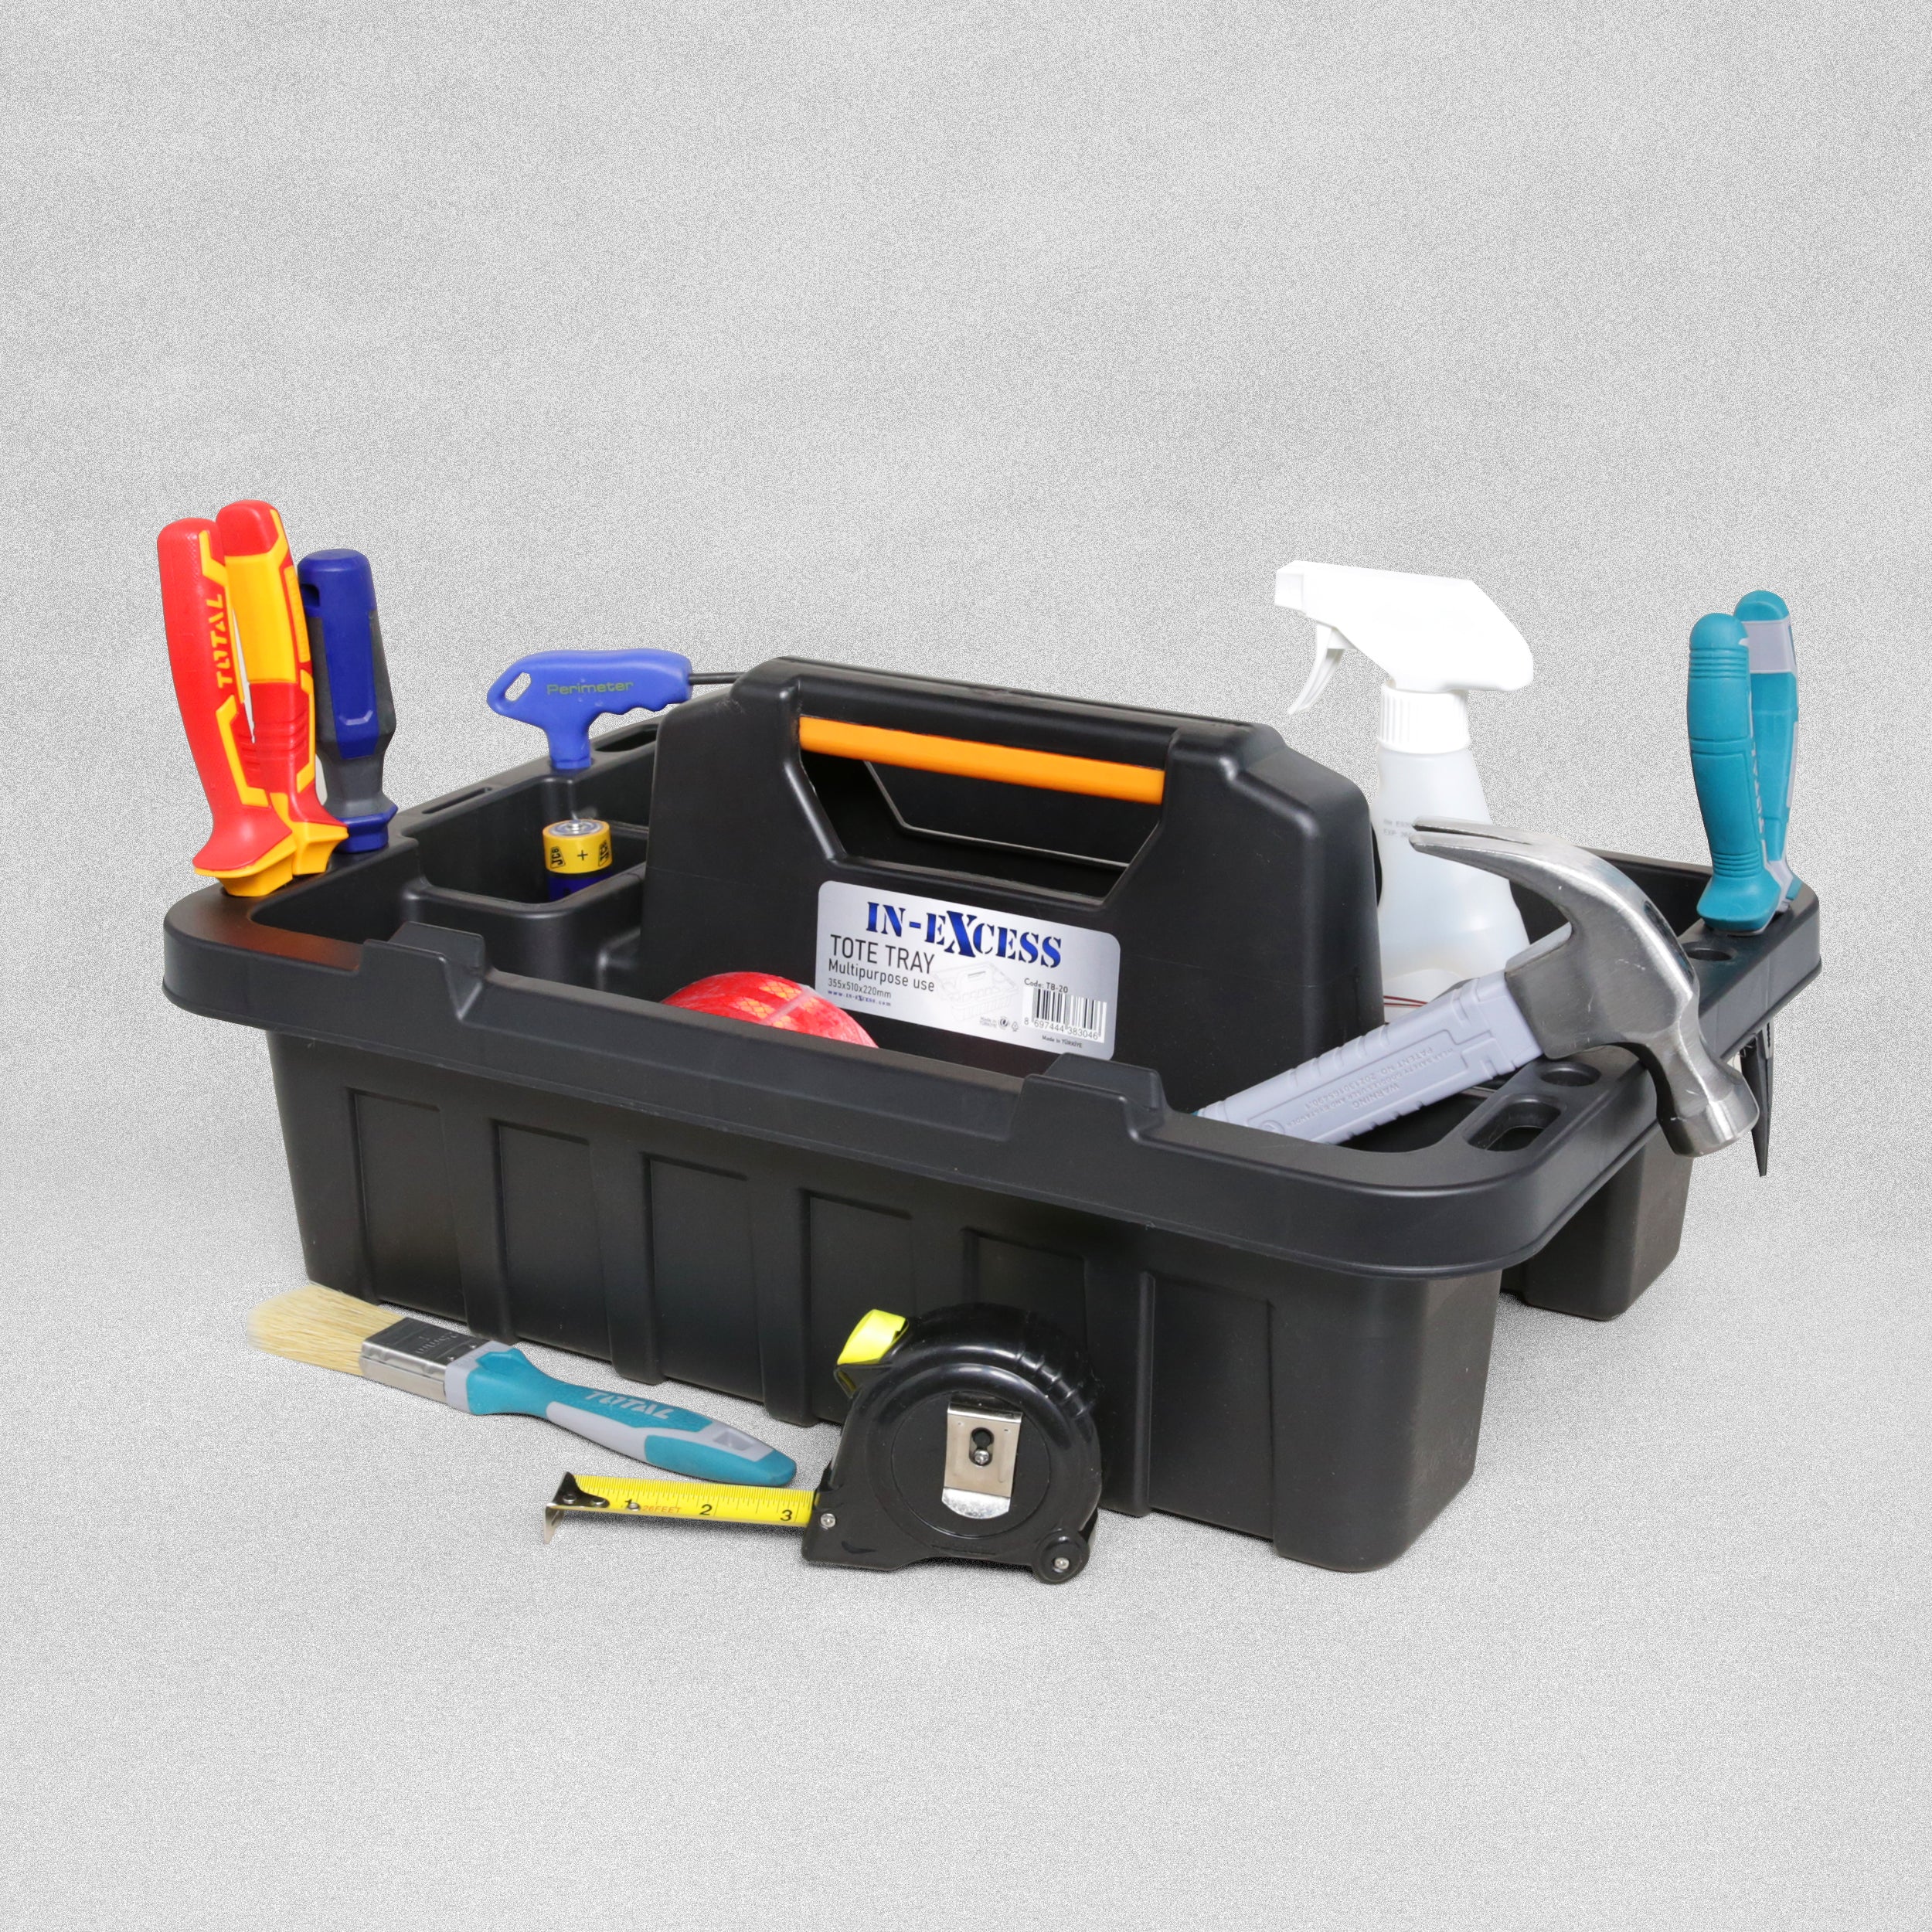 In-Excess Heavy Duty Tote Tray Organiser & Toolbox - Black